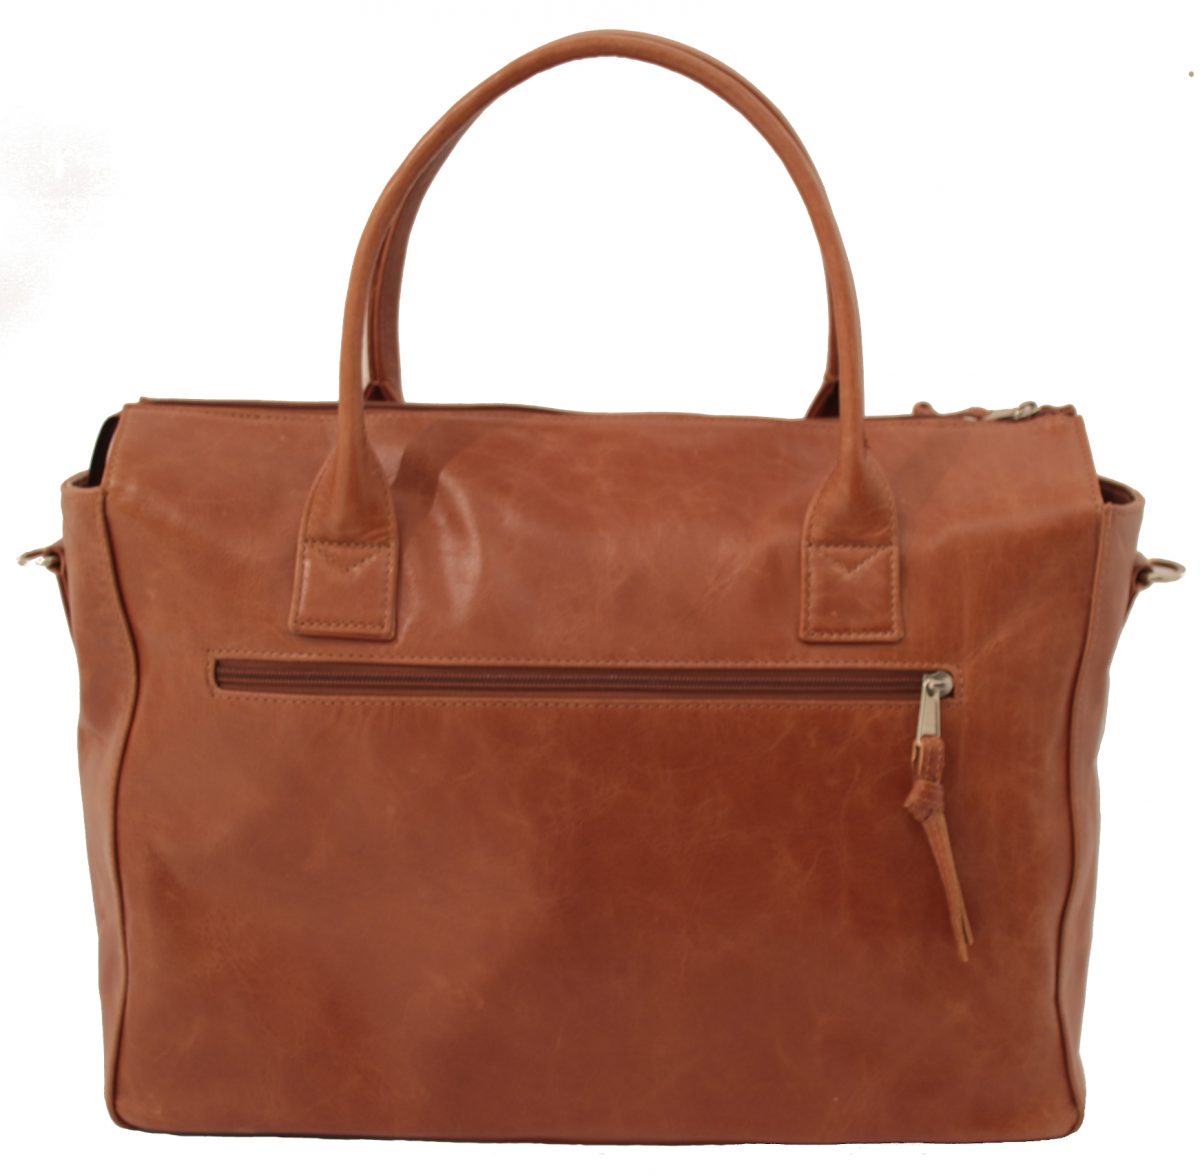 jeankelly_leather baby bag